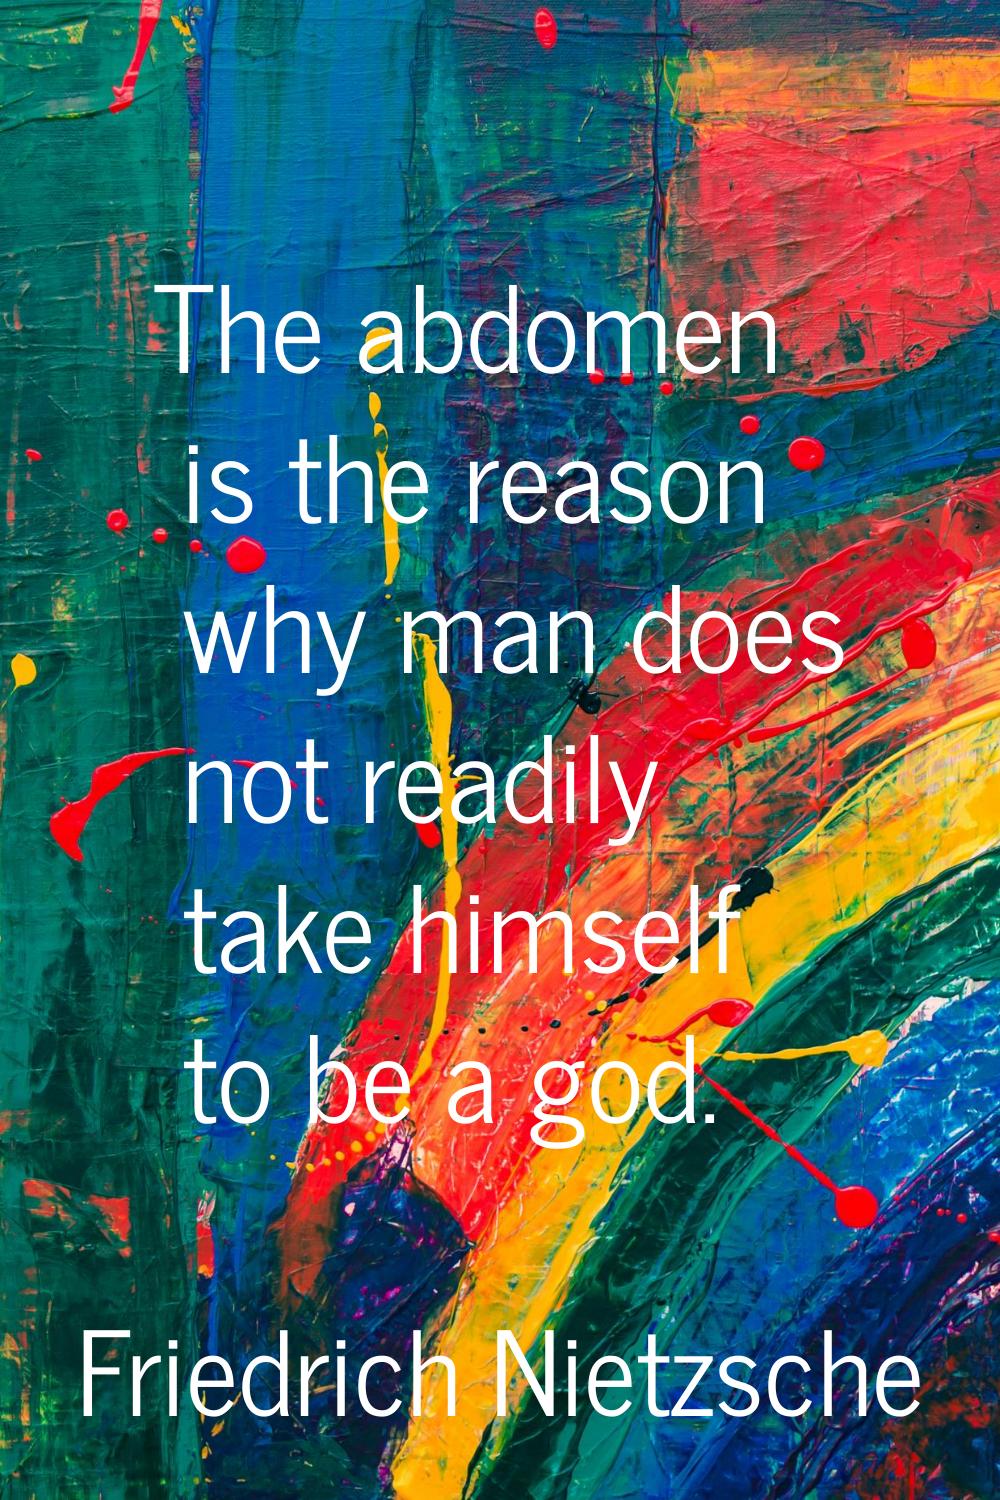 The abdomen is the reason why man does not readily take himself to be a god.